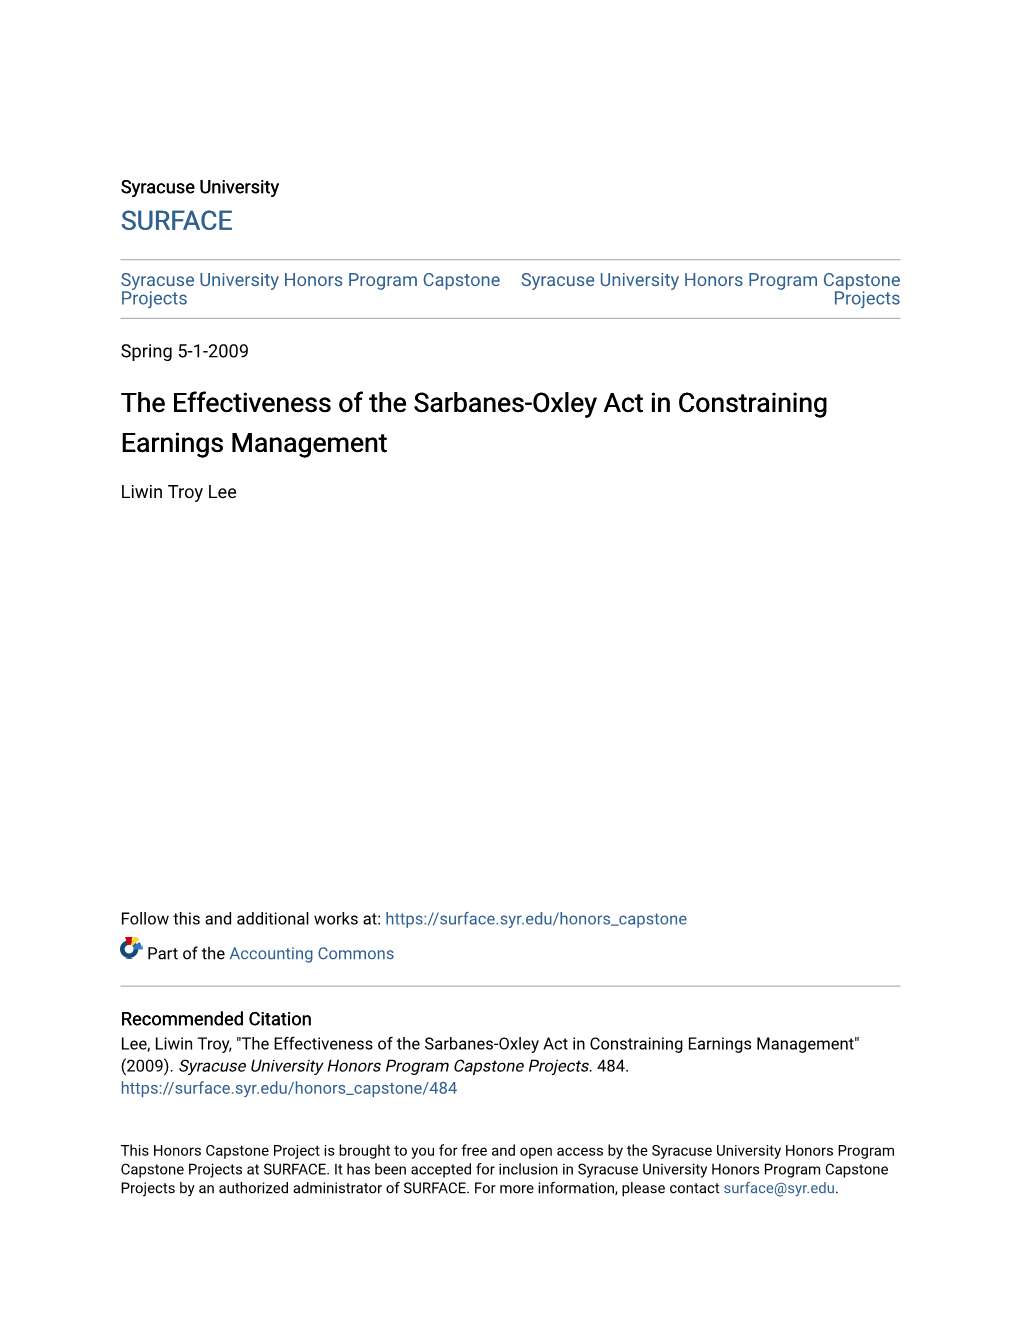 The Effectiveness of the Sarbanes-Oxley Act in Constraining Earnings Management